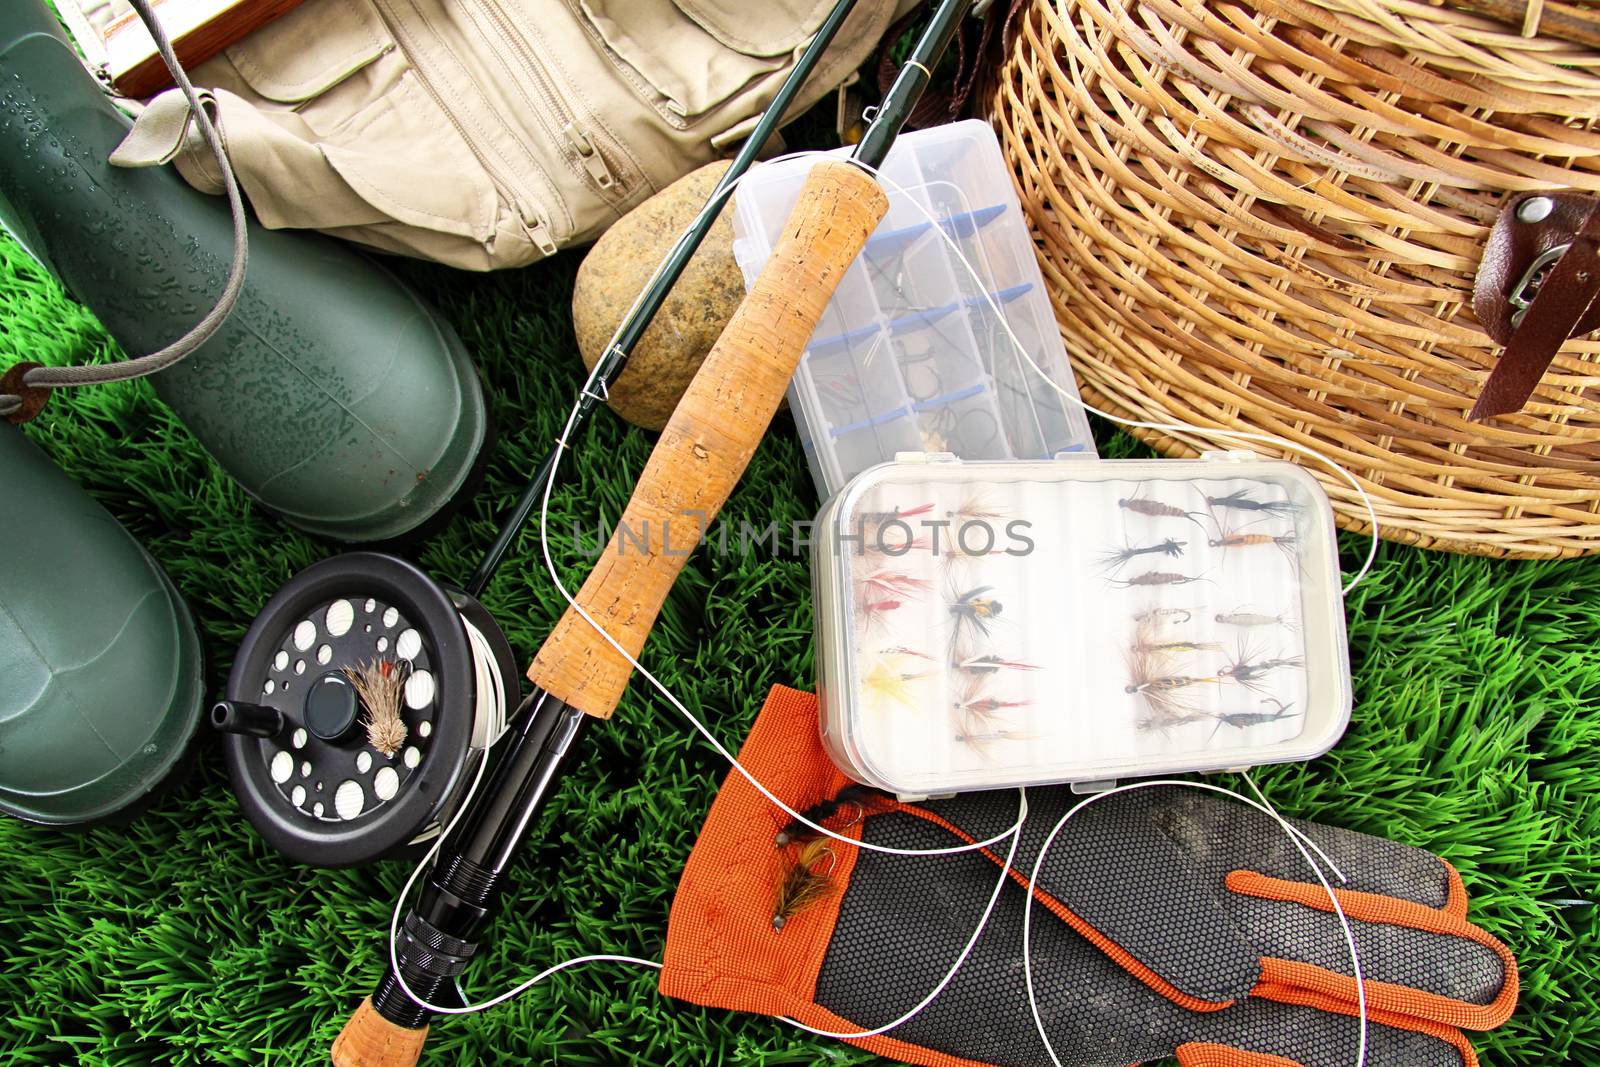 Fly fishing equipment ready to use by Sandralise